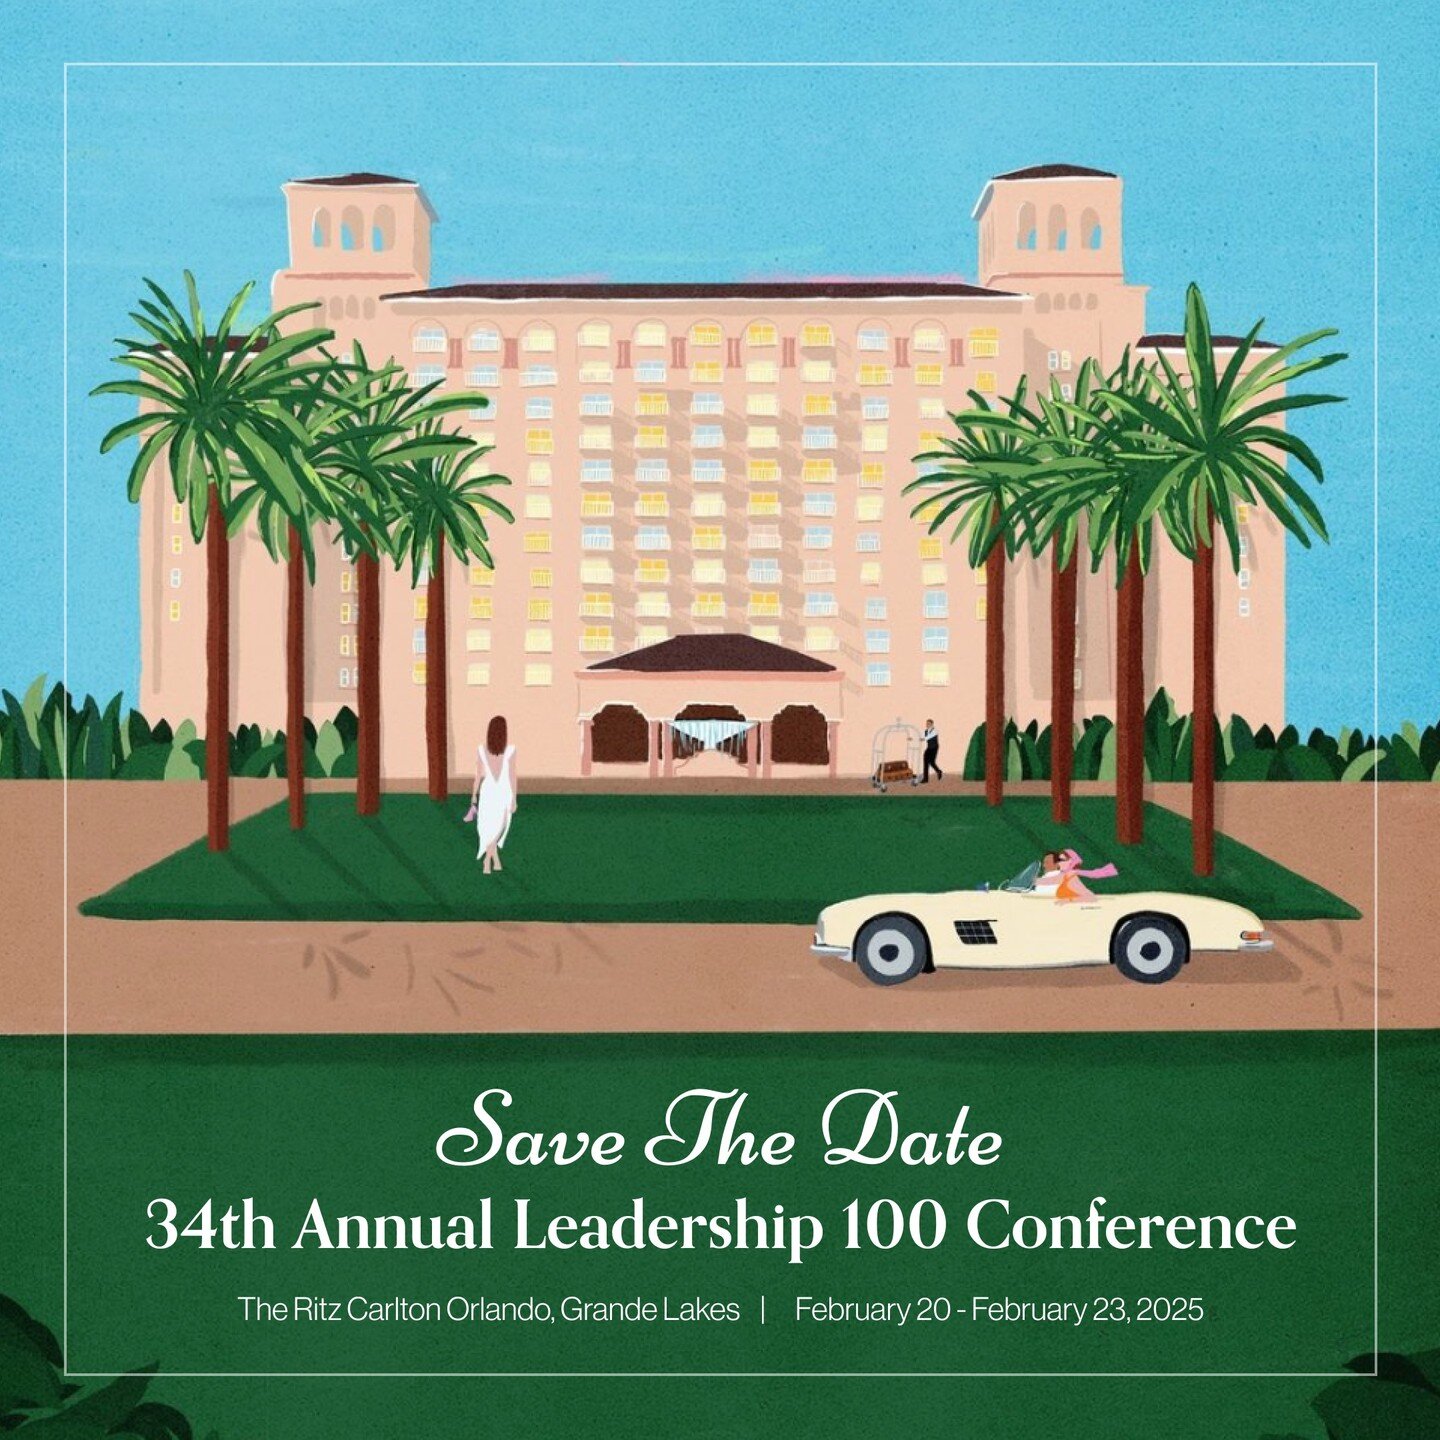 We are excited to announce that the 34th Annual Leadership Conference will be held February 20-23, 2025, at the stunning Ritz Carlton Orlando, Grande Lakes! We look forward to welcoming all of our members at guests in Orlando. 

📷 credit: @ritzcarlt